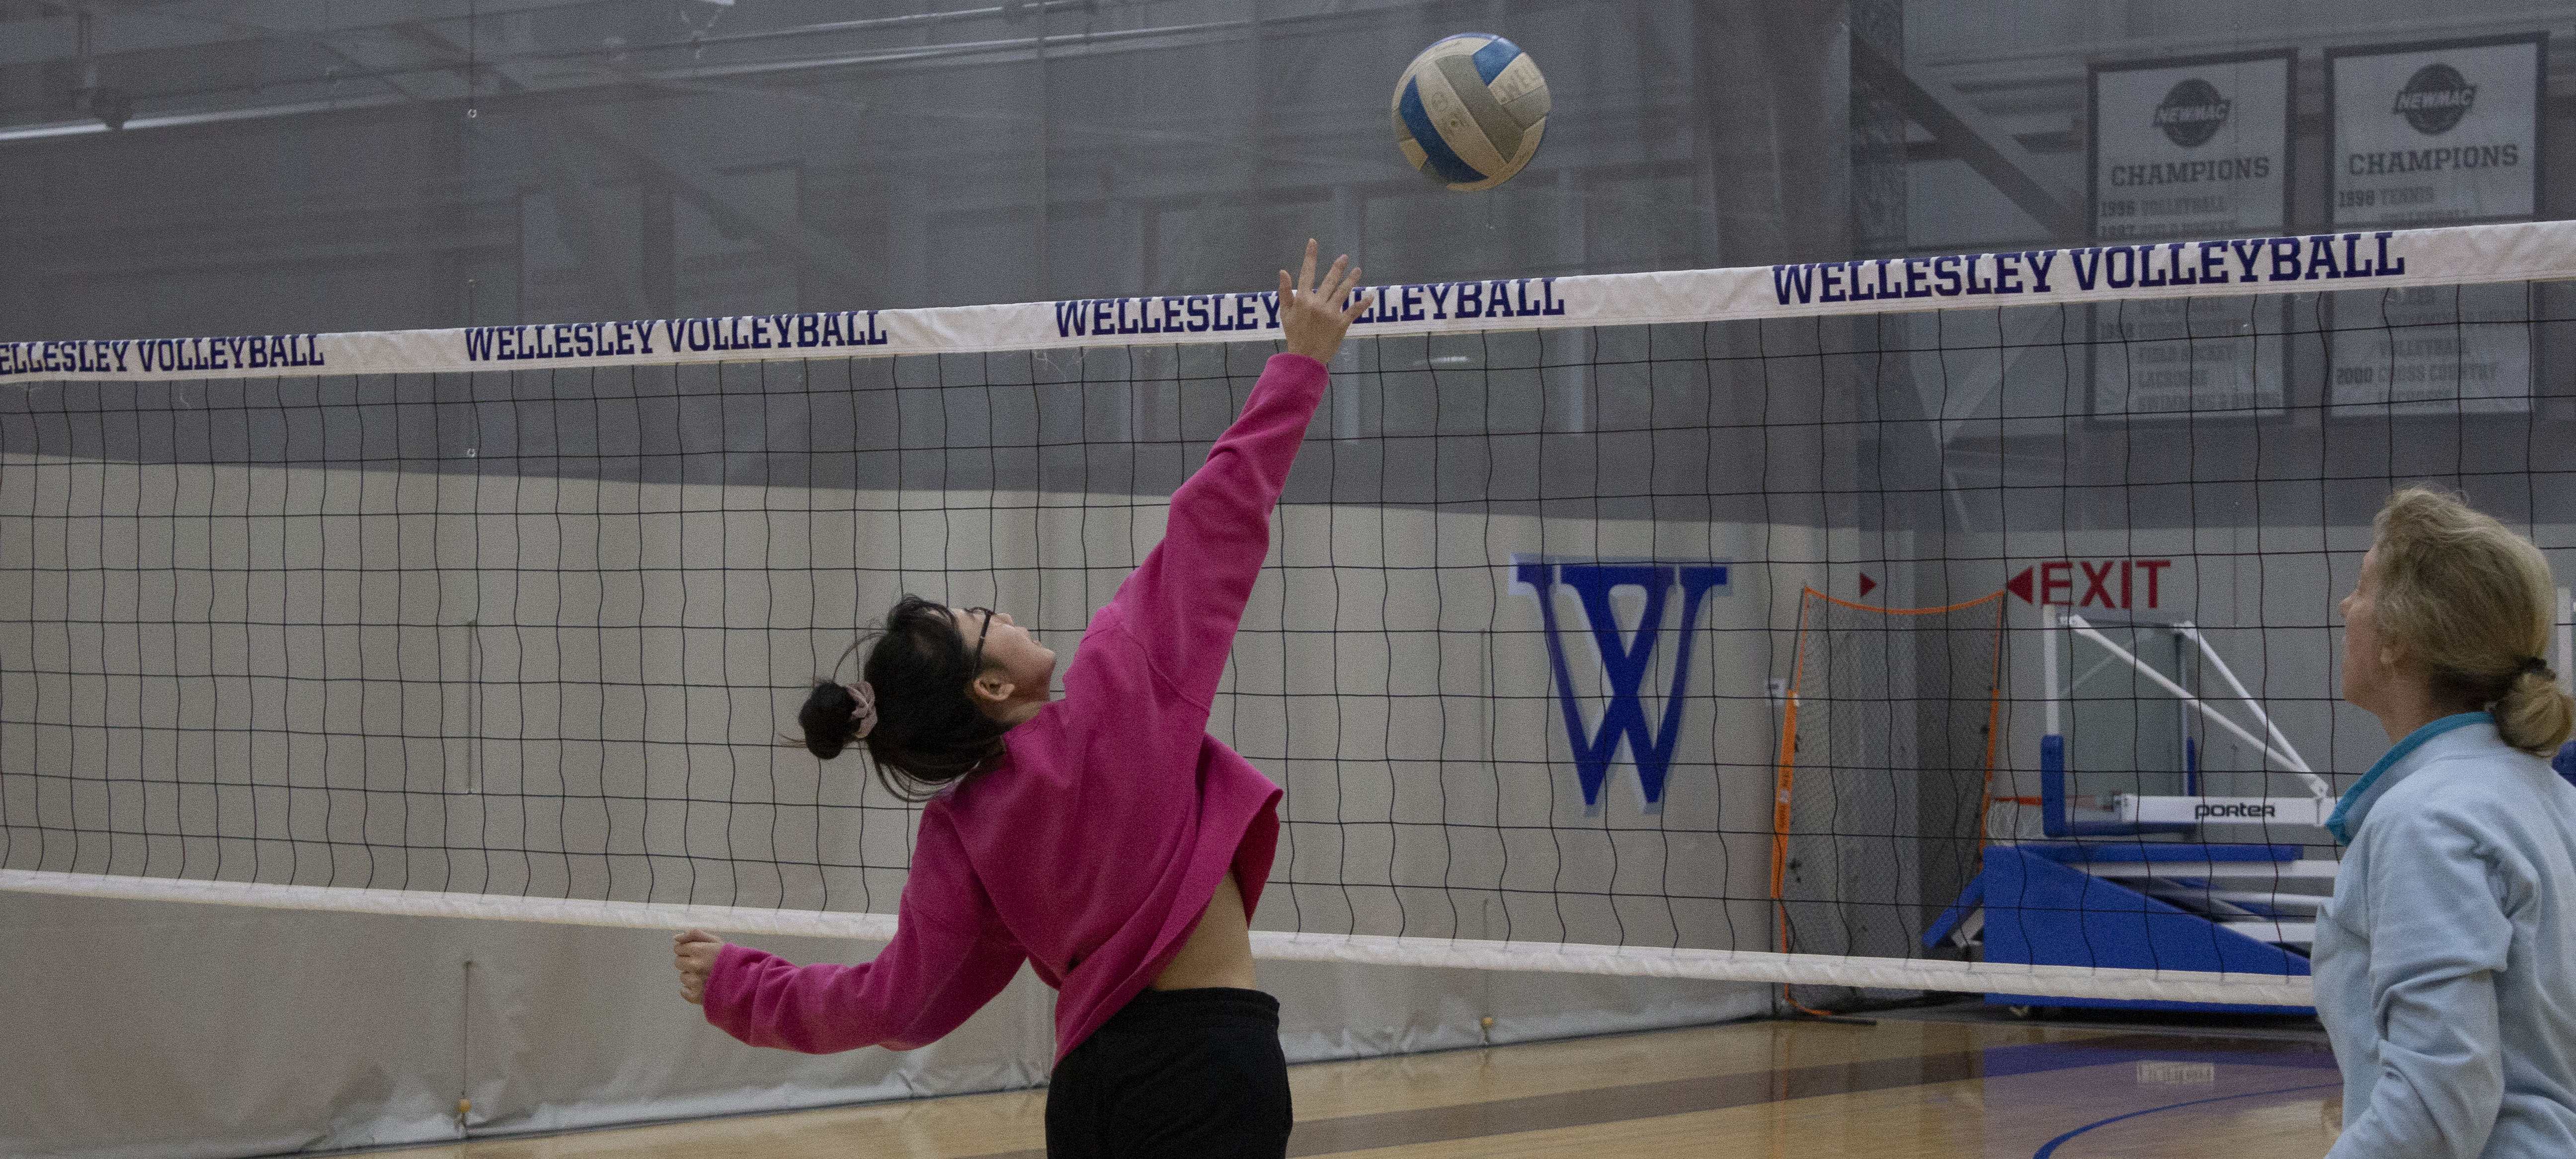 A student in front of a volleyball net with a centered blue W, throws a volleyball into the air to spike it. Their coach watches